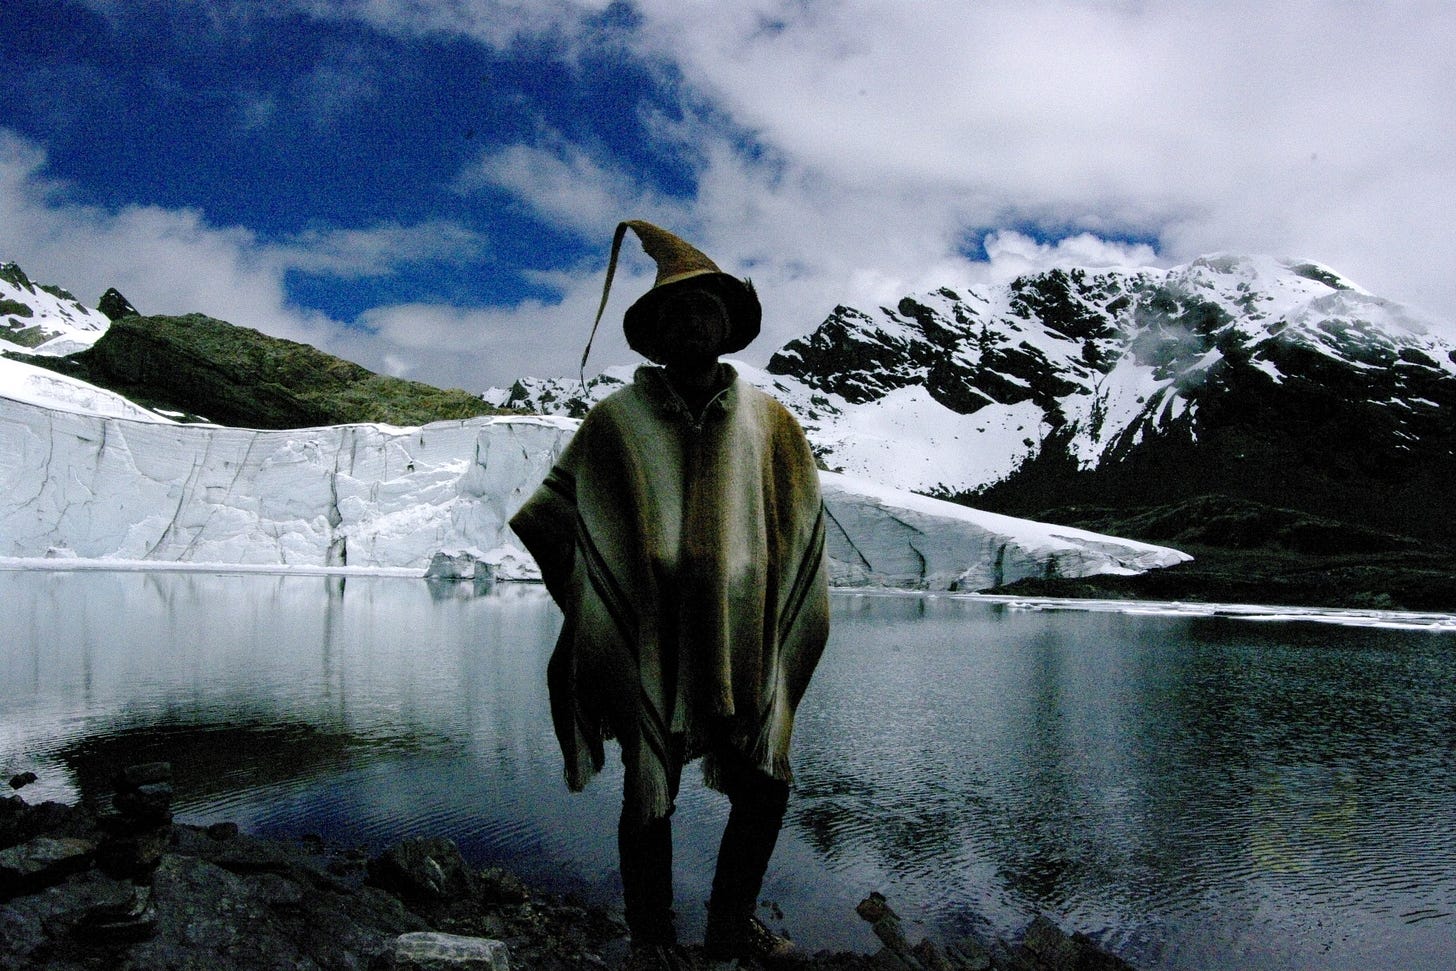 Eddie wearing a poncho and coconut skin hat with the silhouette of a wizard. He stands before glaciers and an alpine lake in the Northern mountains of Peru.